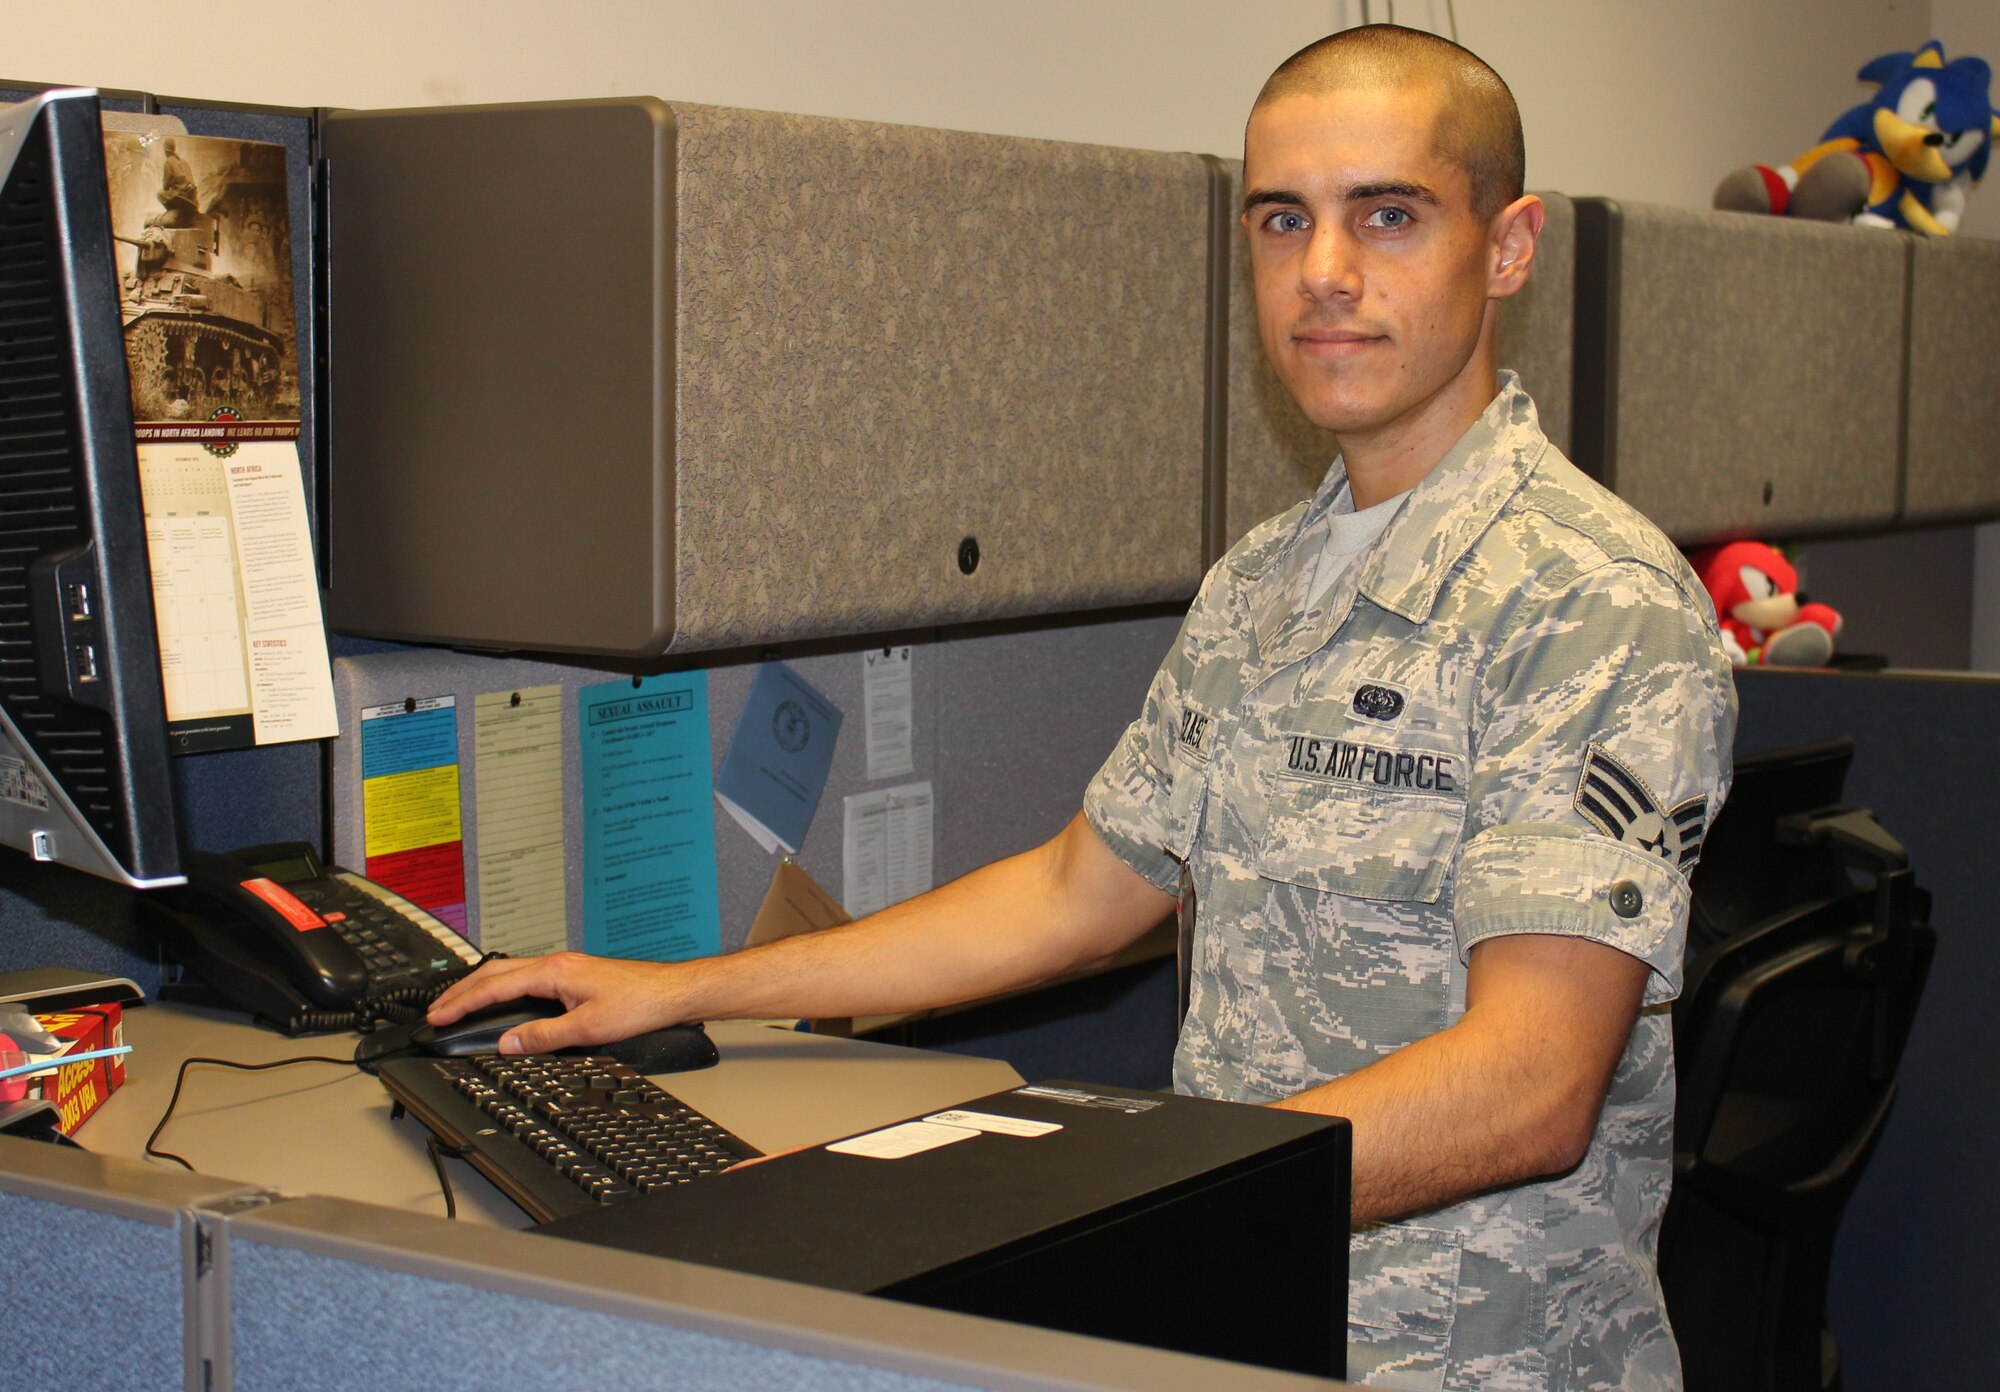 Senior Airman Christopher Elszasz, a database administrator for the Training Business Area, assigned to Enterprise Logistics Systems Division at Maxwell-Gunter Annex, Ala., was recently selected for Air Force Materiel Command Senior Leader Commissioning Program. He is slated to leave active duty and attend the University of Colorado – Colorado Springs for the fall 2017 semester. (Courtesy photo)